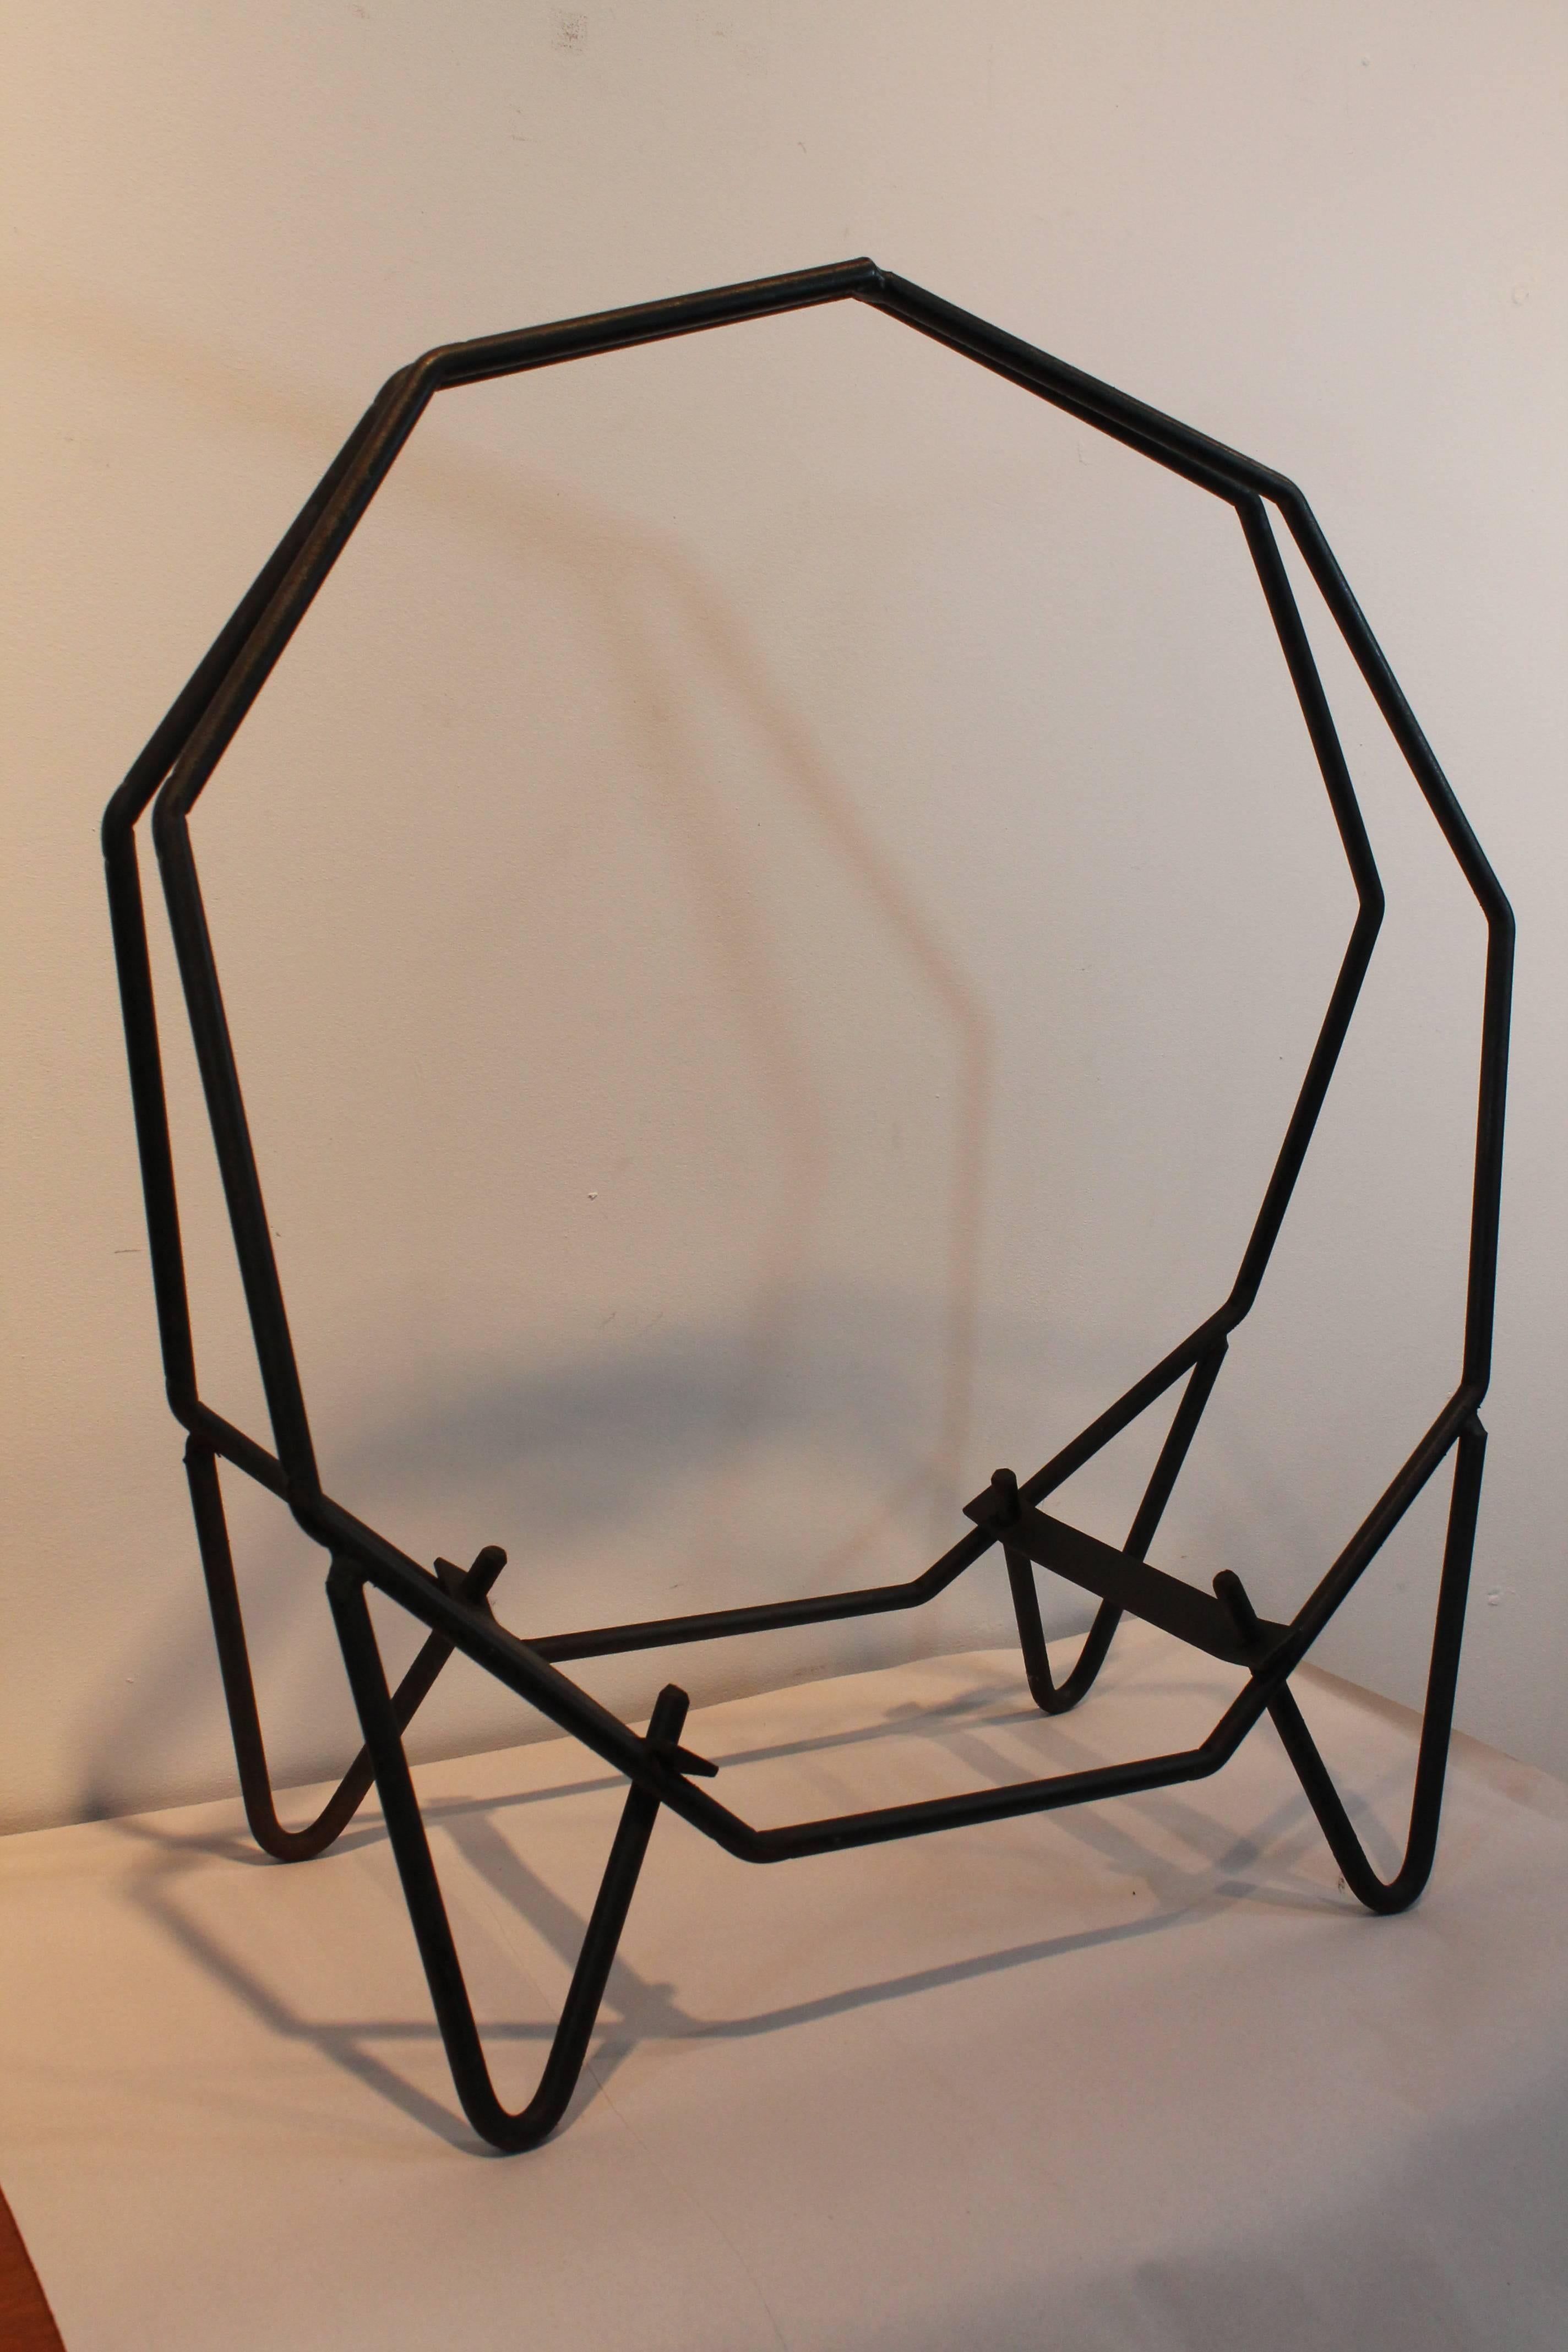 Exceptional modernist form on this wrought iron log rack.
There are two nonogon (nine-sided) geometric shaped forms that are joined at the top and have hairpin legs at the base.
Geometric Minimalist sculptural bliss!